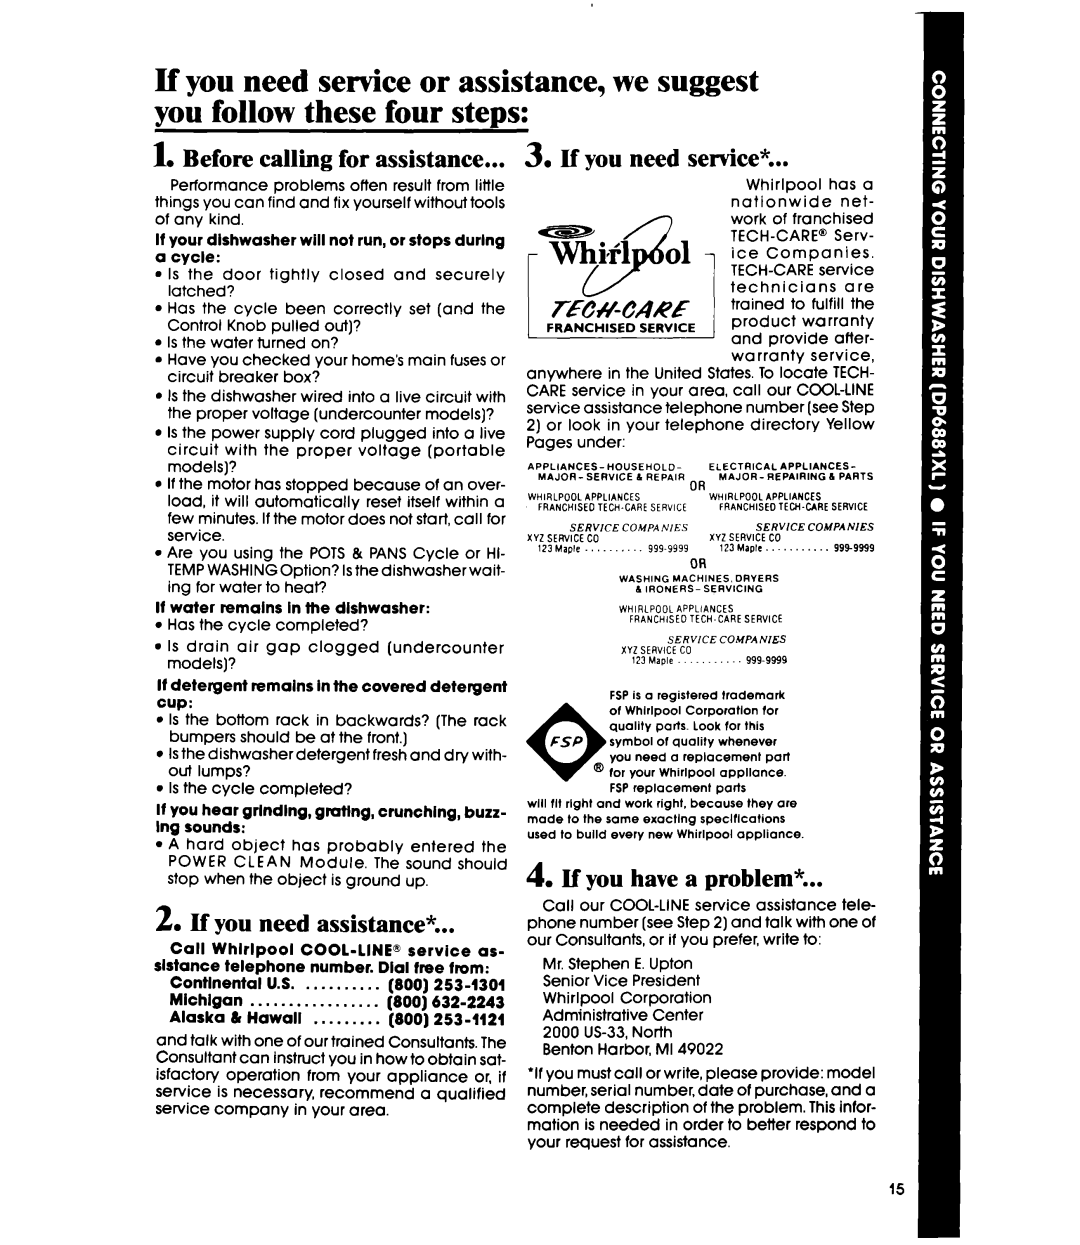 Whirlpool DP6881XL manual If you need assistance, If you need service, If you have a problem, Before calling for assistance 